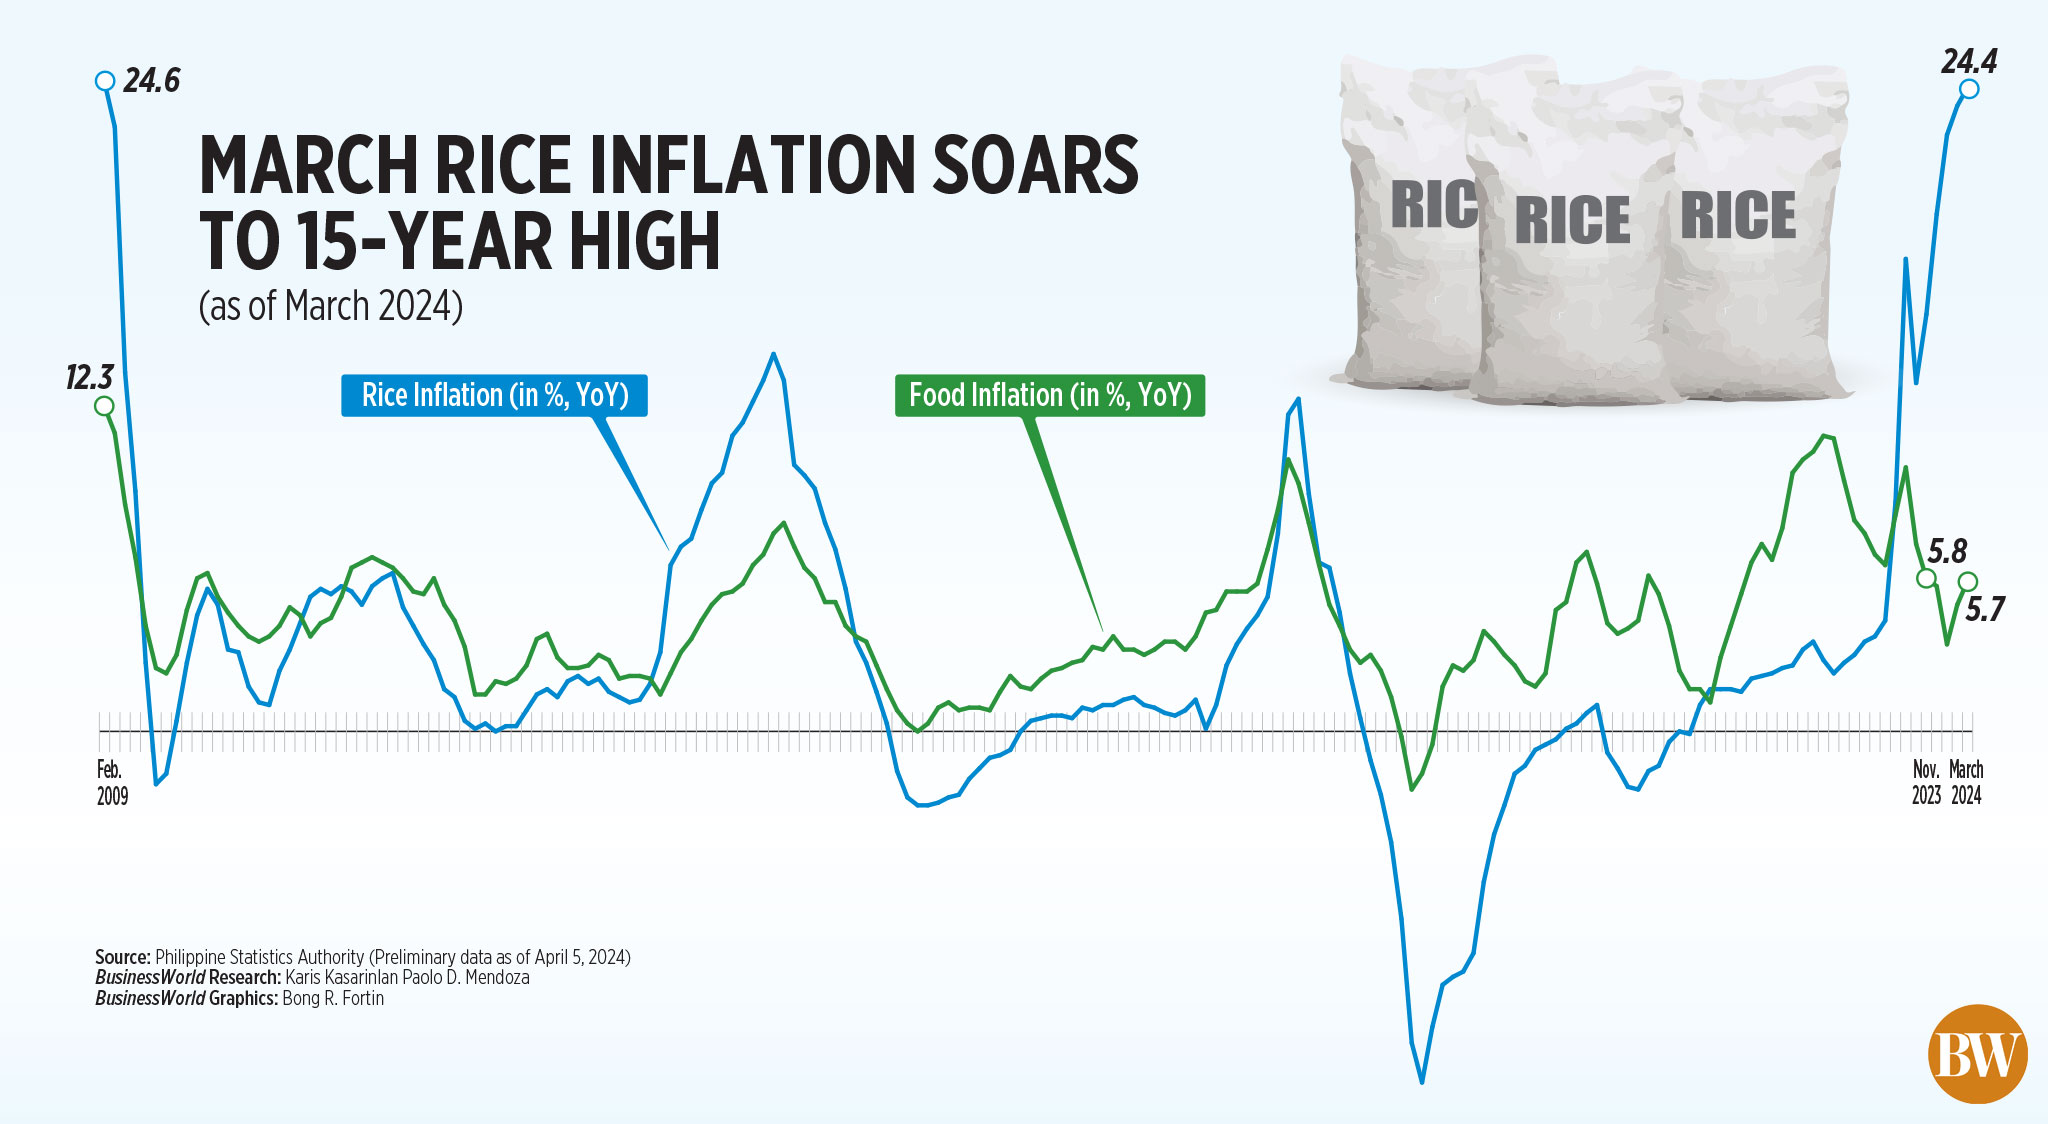 March rice inflation soars to 15-year high